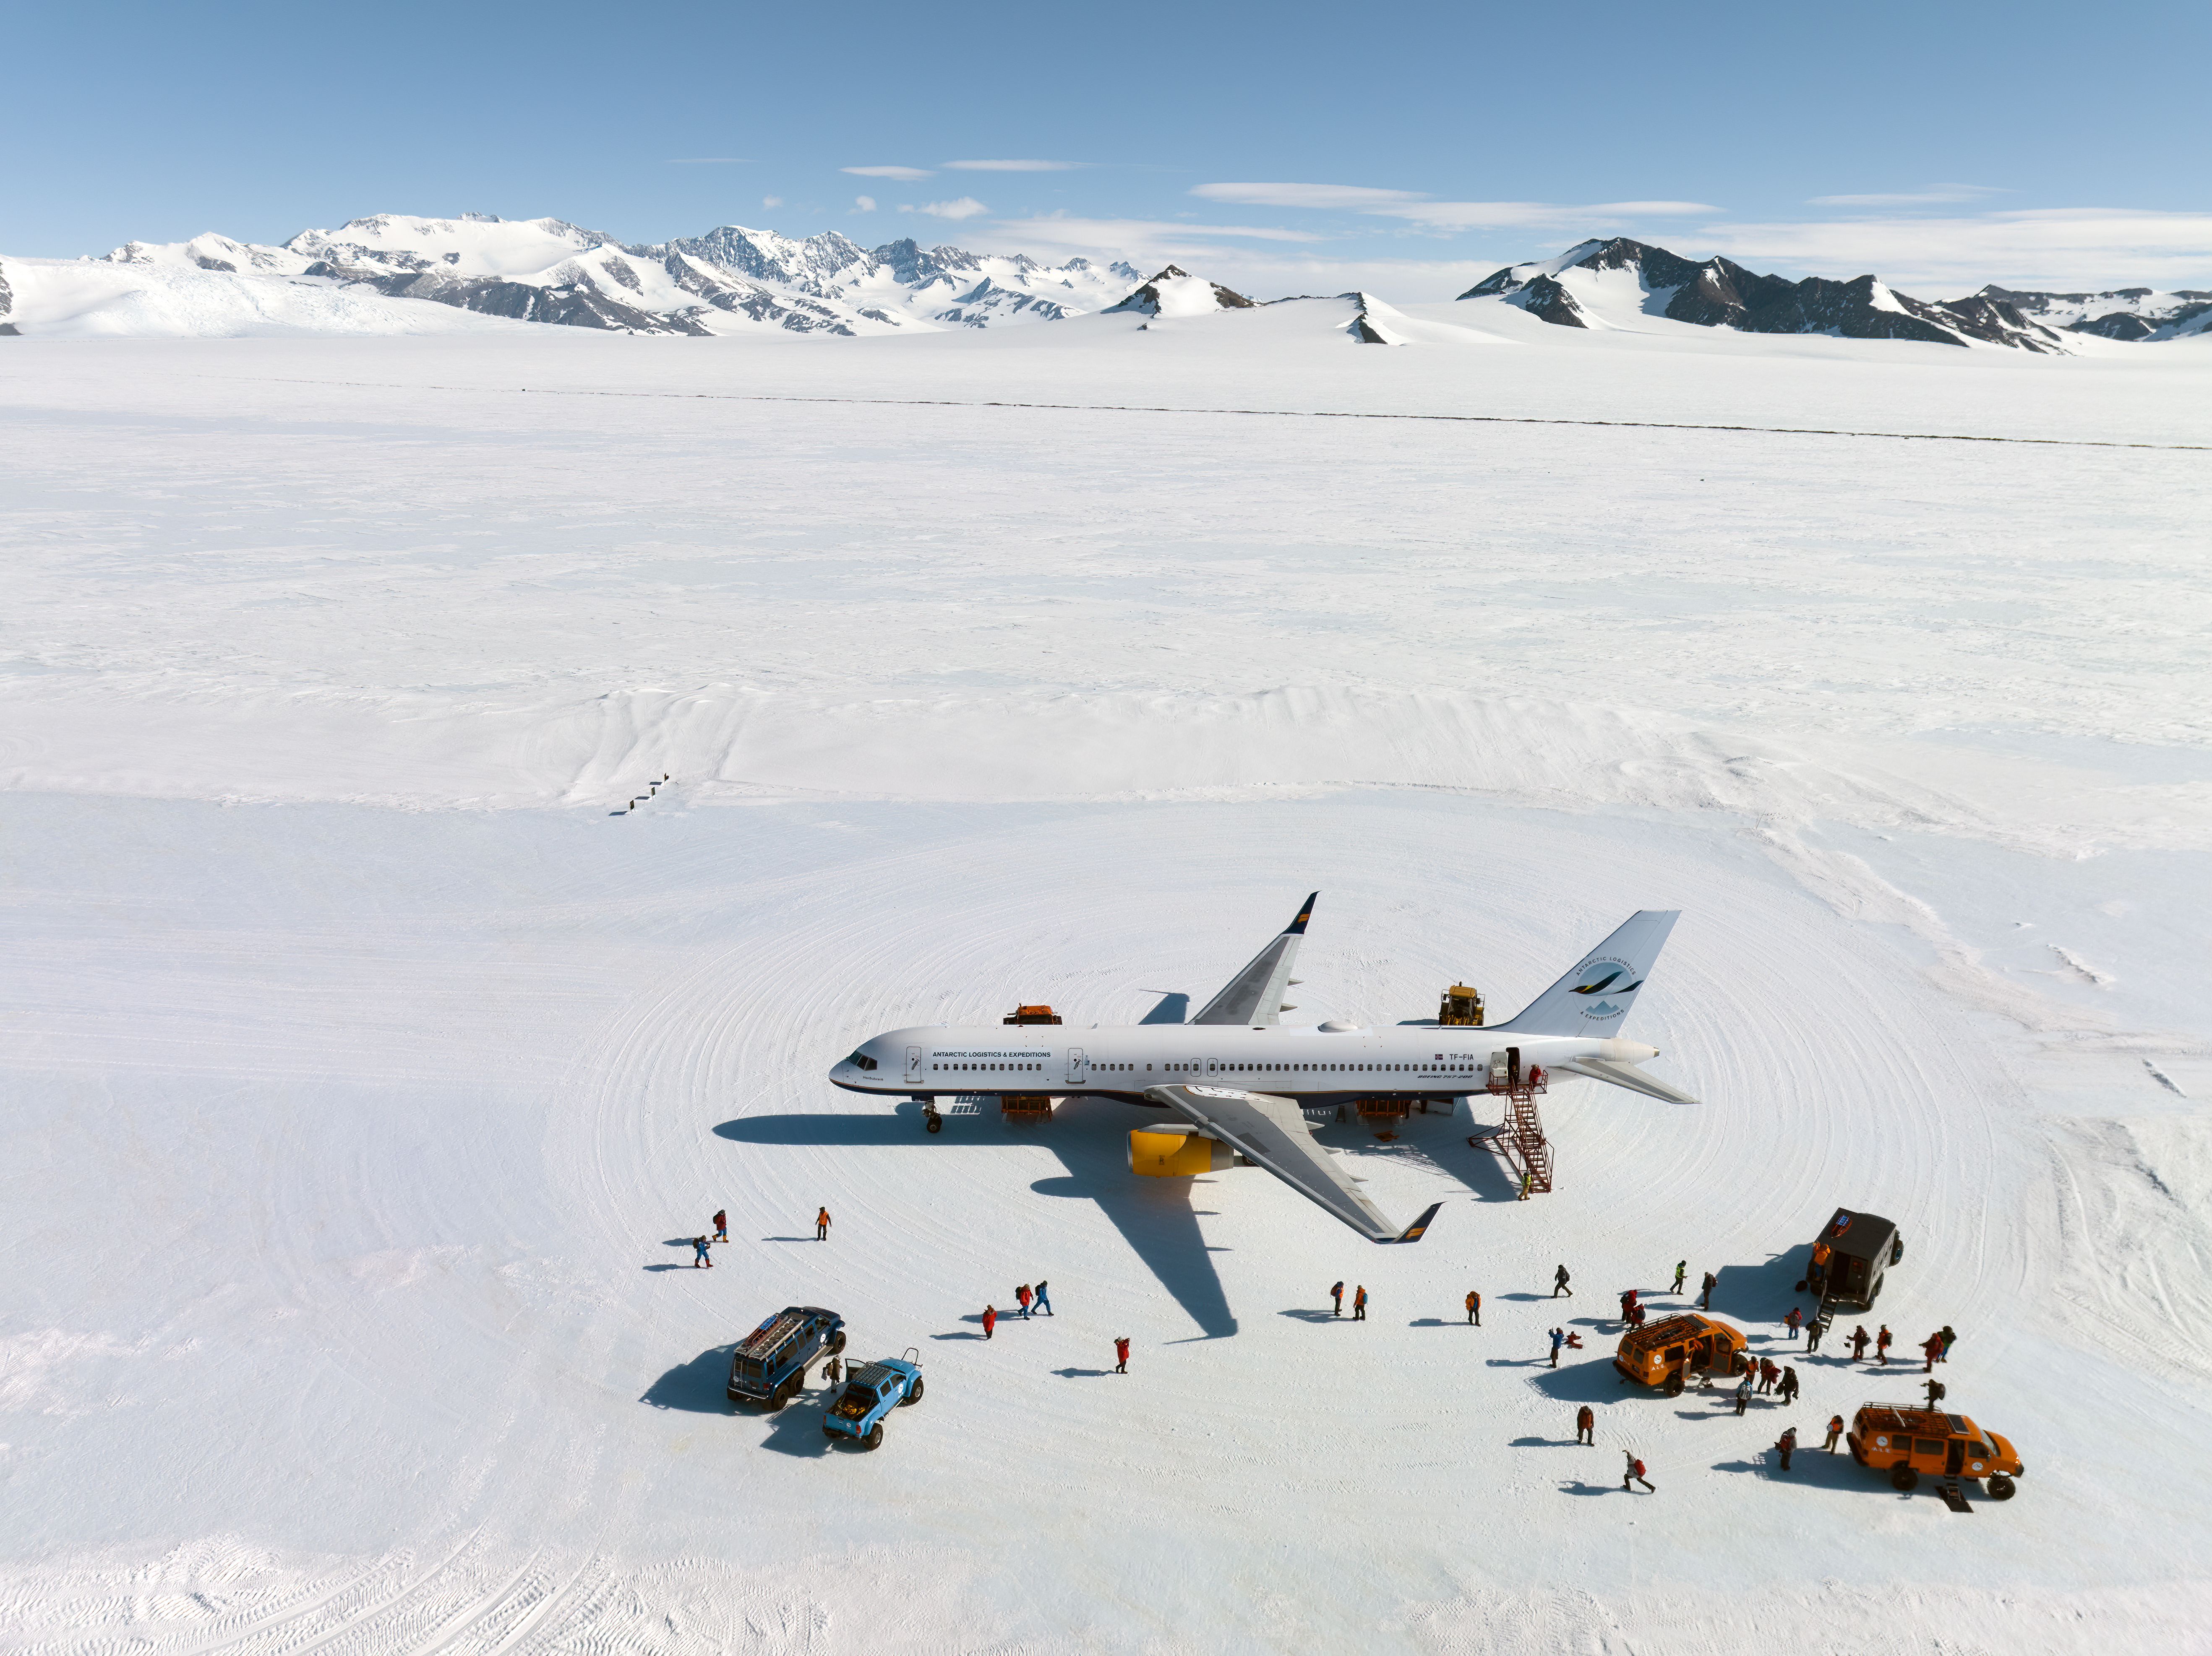 IcelandAir 757 at the Blue Ice Runway at Union Glacier